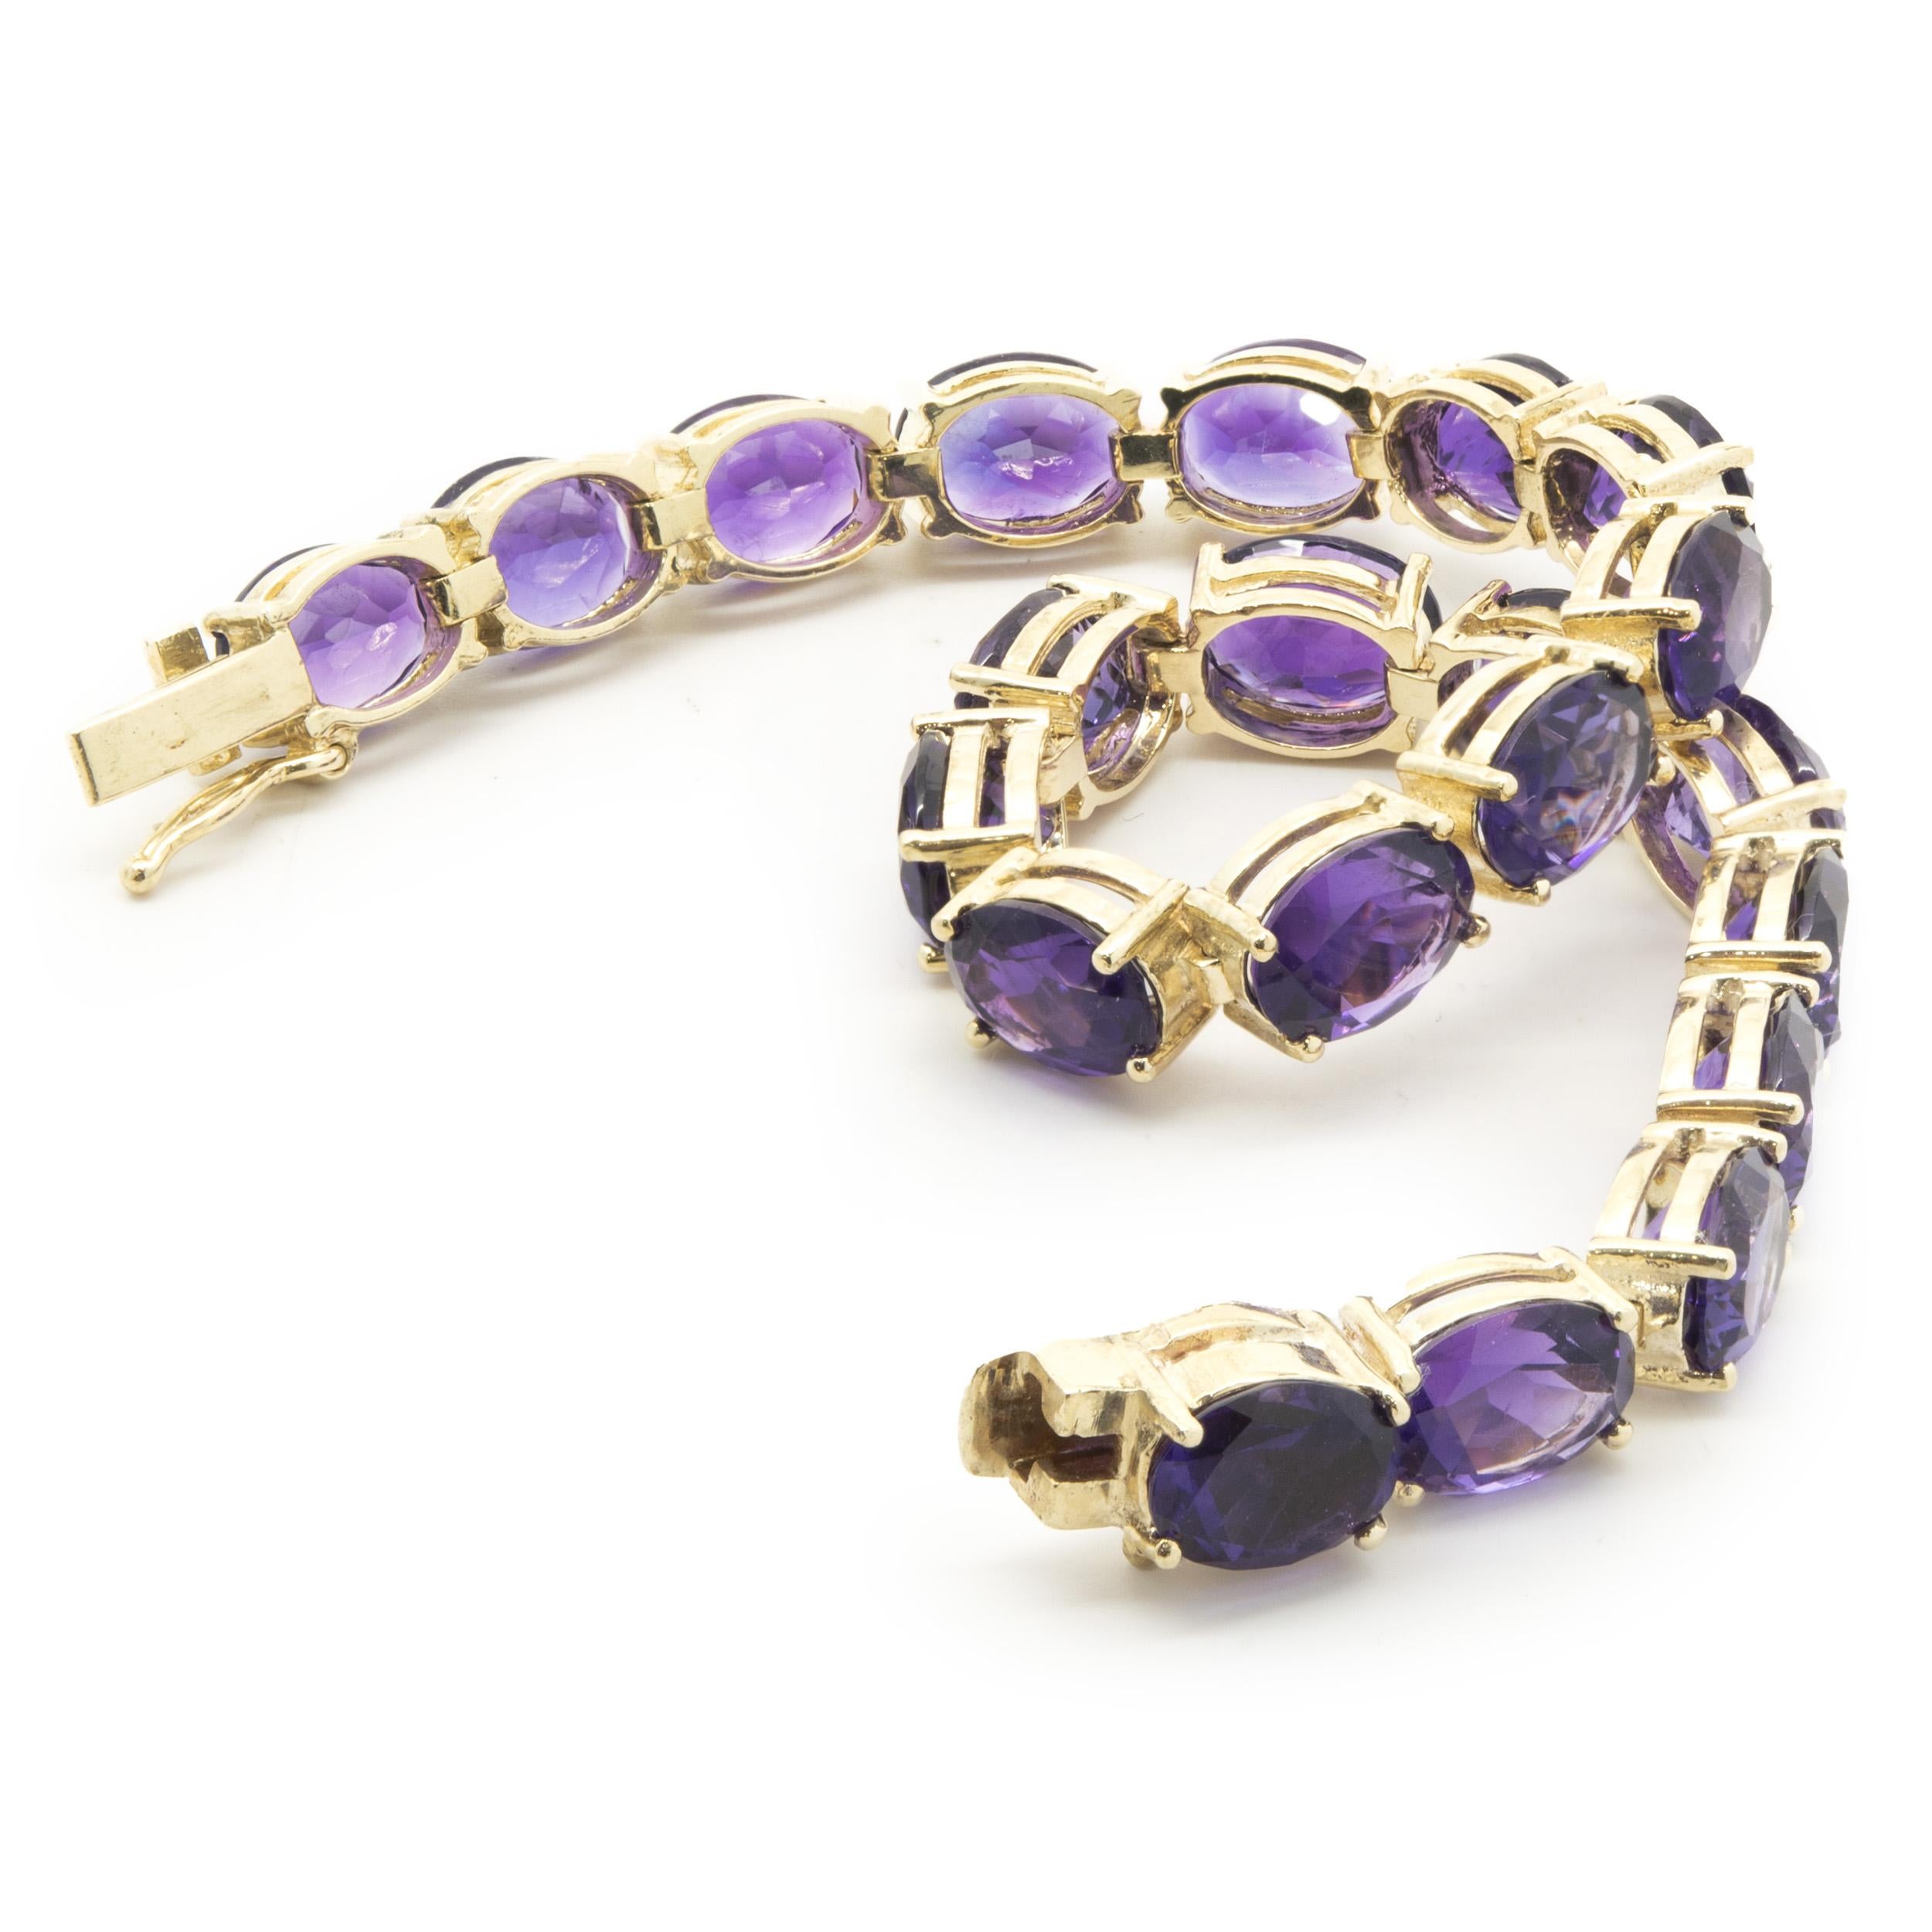 Designer: custom
Material: 14K yellow gold
Weight:  16.70 grams
Amethyst: 21 oval  cut = 22.26cttw
Dimensions: bracelet will fit up to a 7-inch wrist
